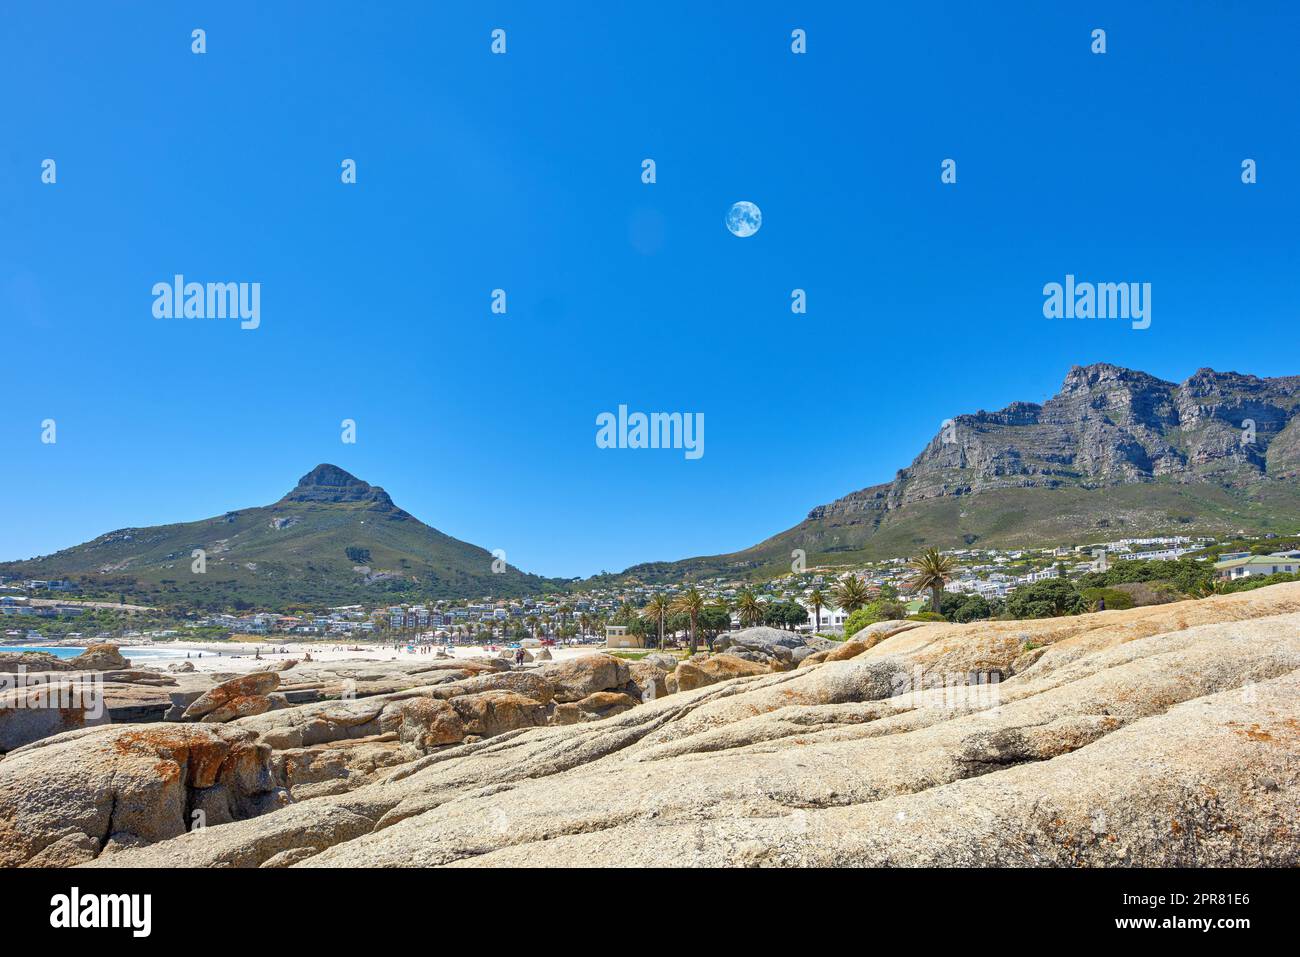 Landscape of mountains and moon on blue sky with copy space. Beautiful rock outcrops of mountaintops near the coastline or bay area. View of Devils Peak and Table Mountain in Cape Town, South Africa Stock Photo